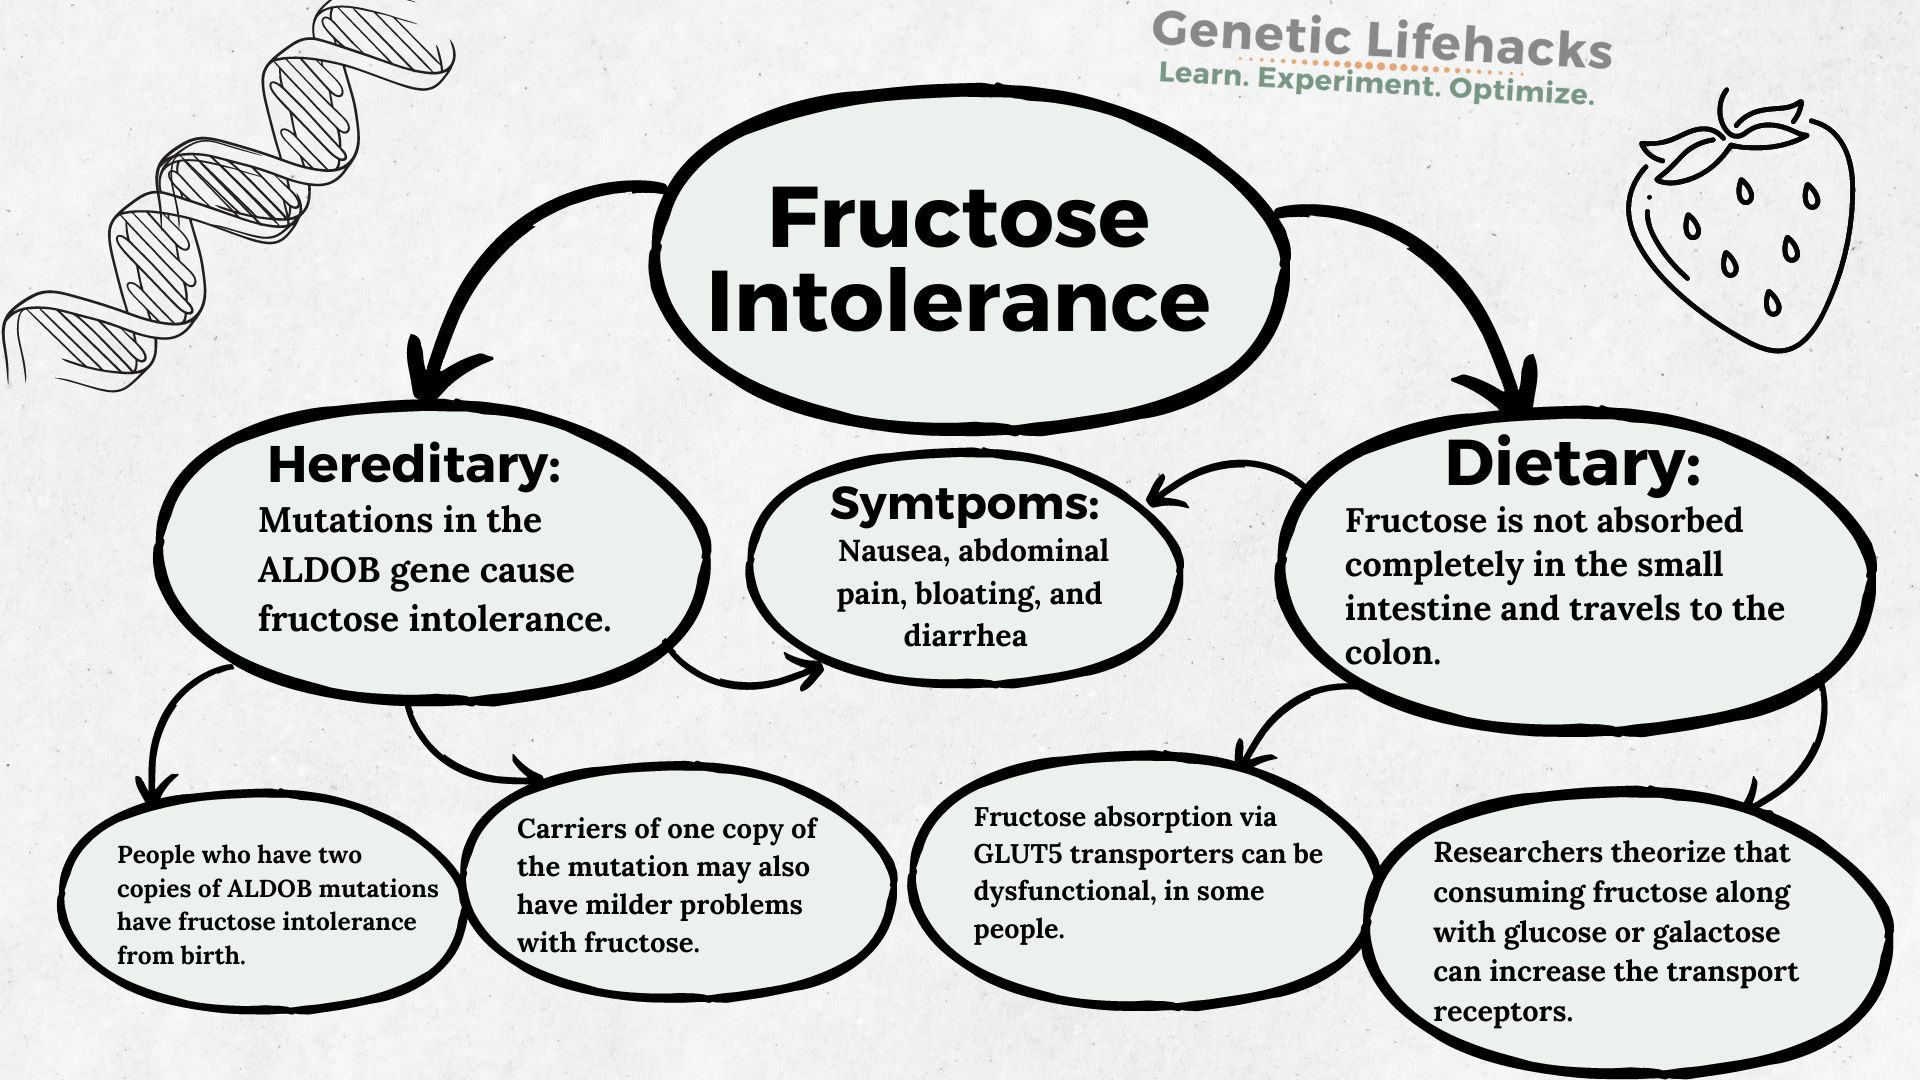 Fructose Intolerance: Hereditary or Dietary?